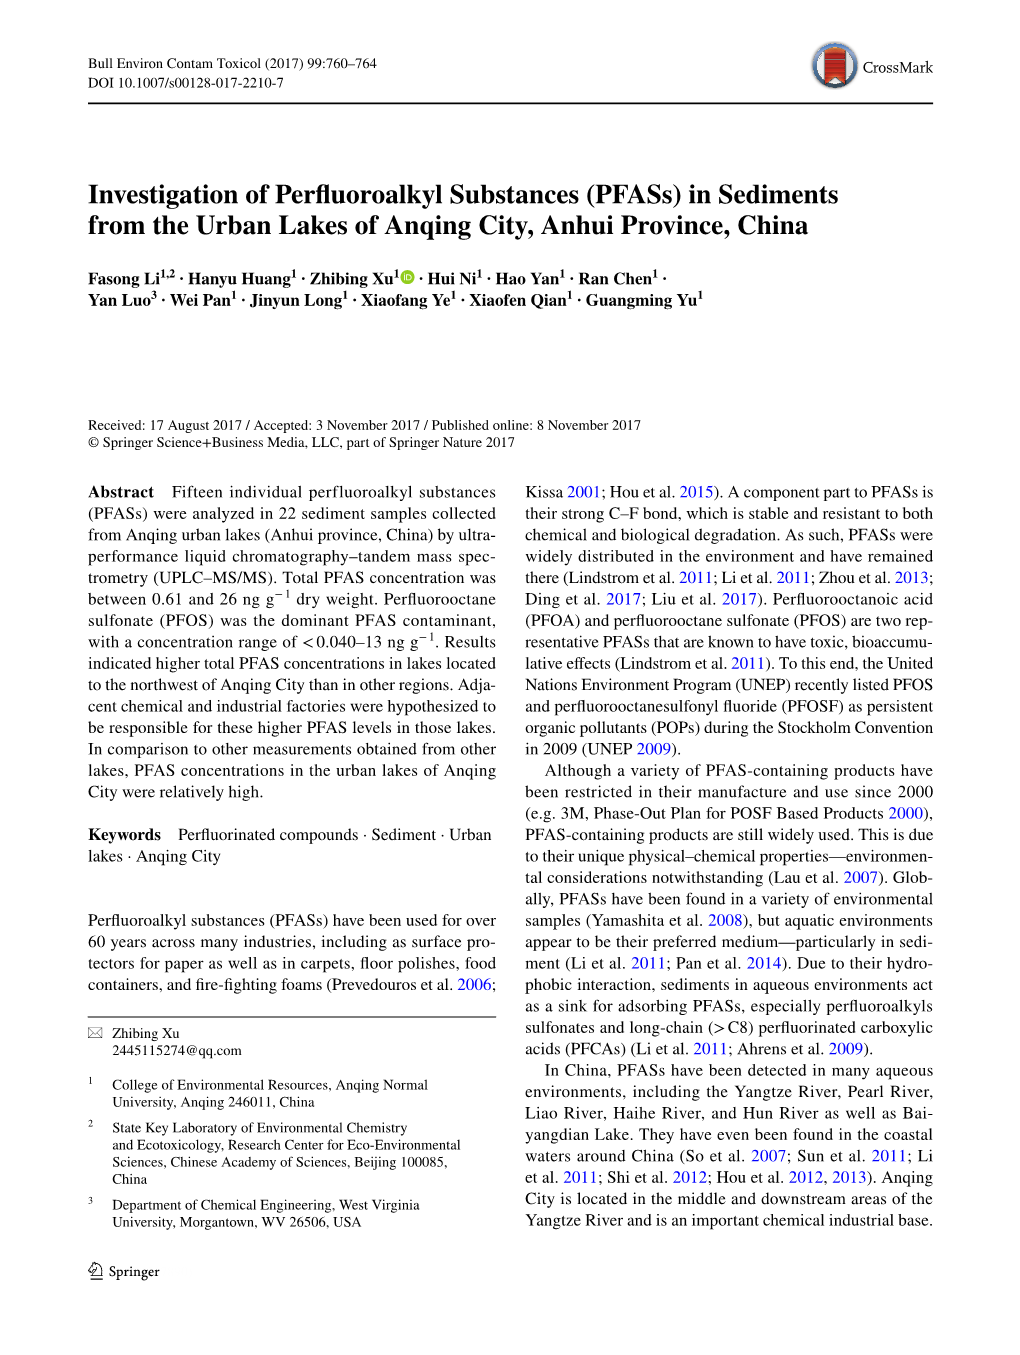 In Sediments from the Urban Lakes of Anqing City, Anhui Province, China